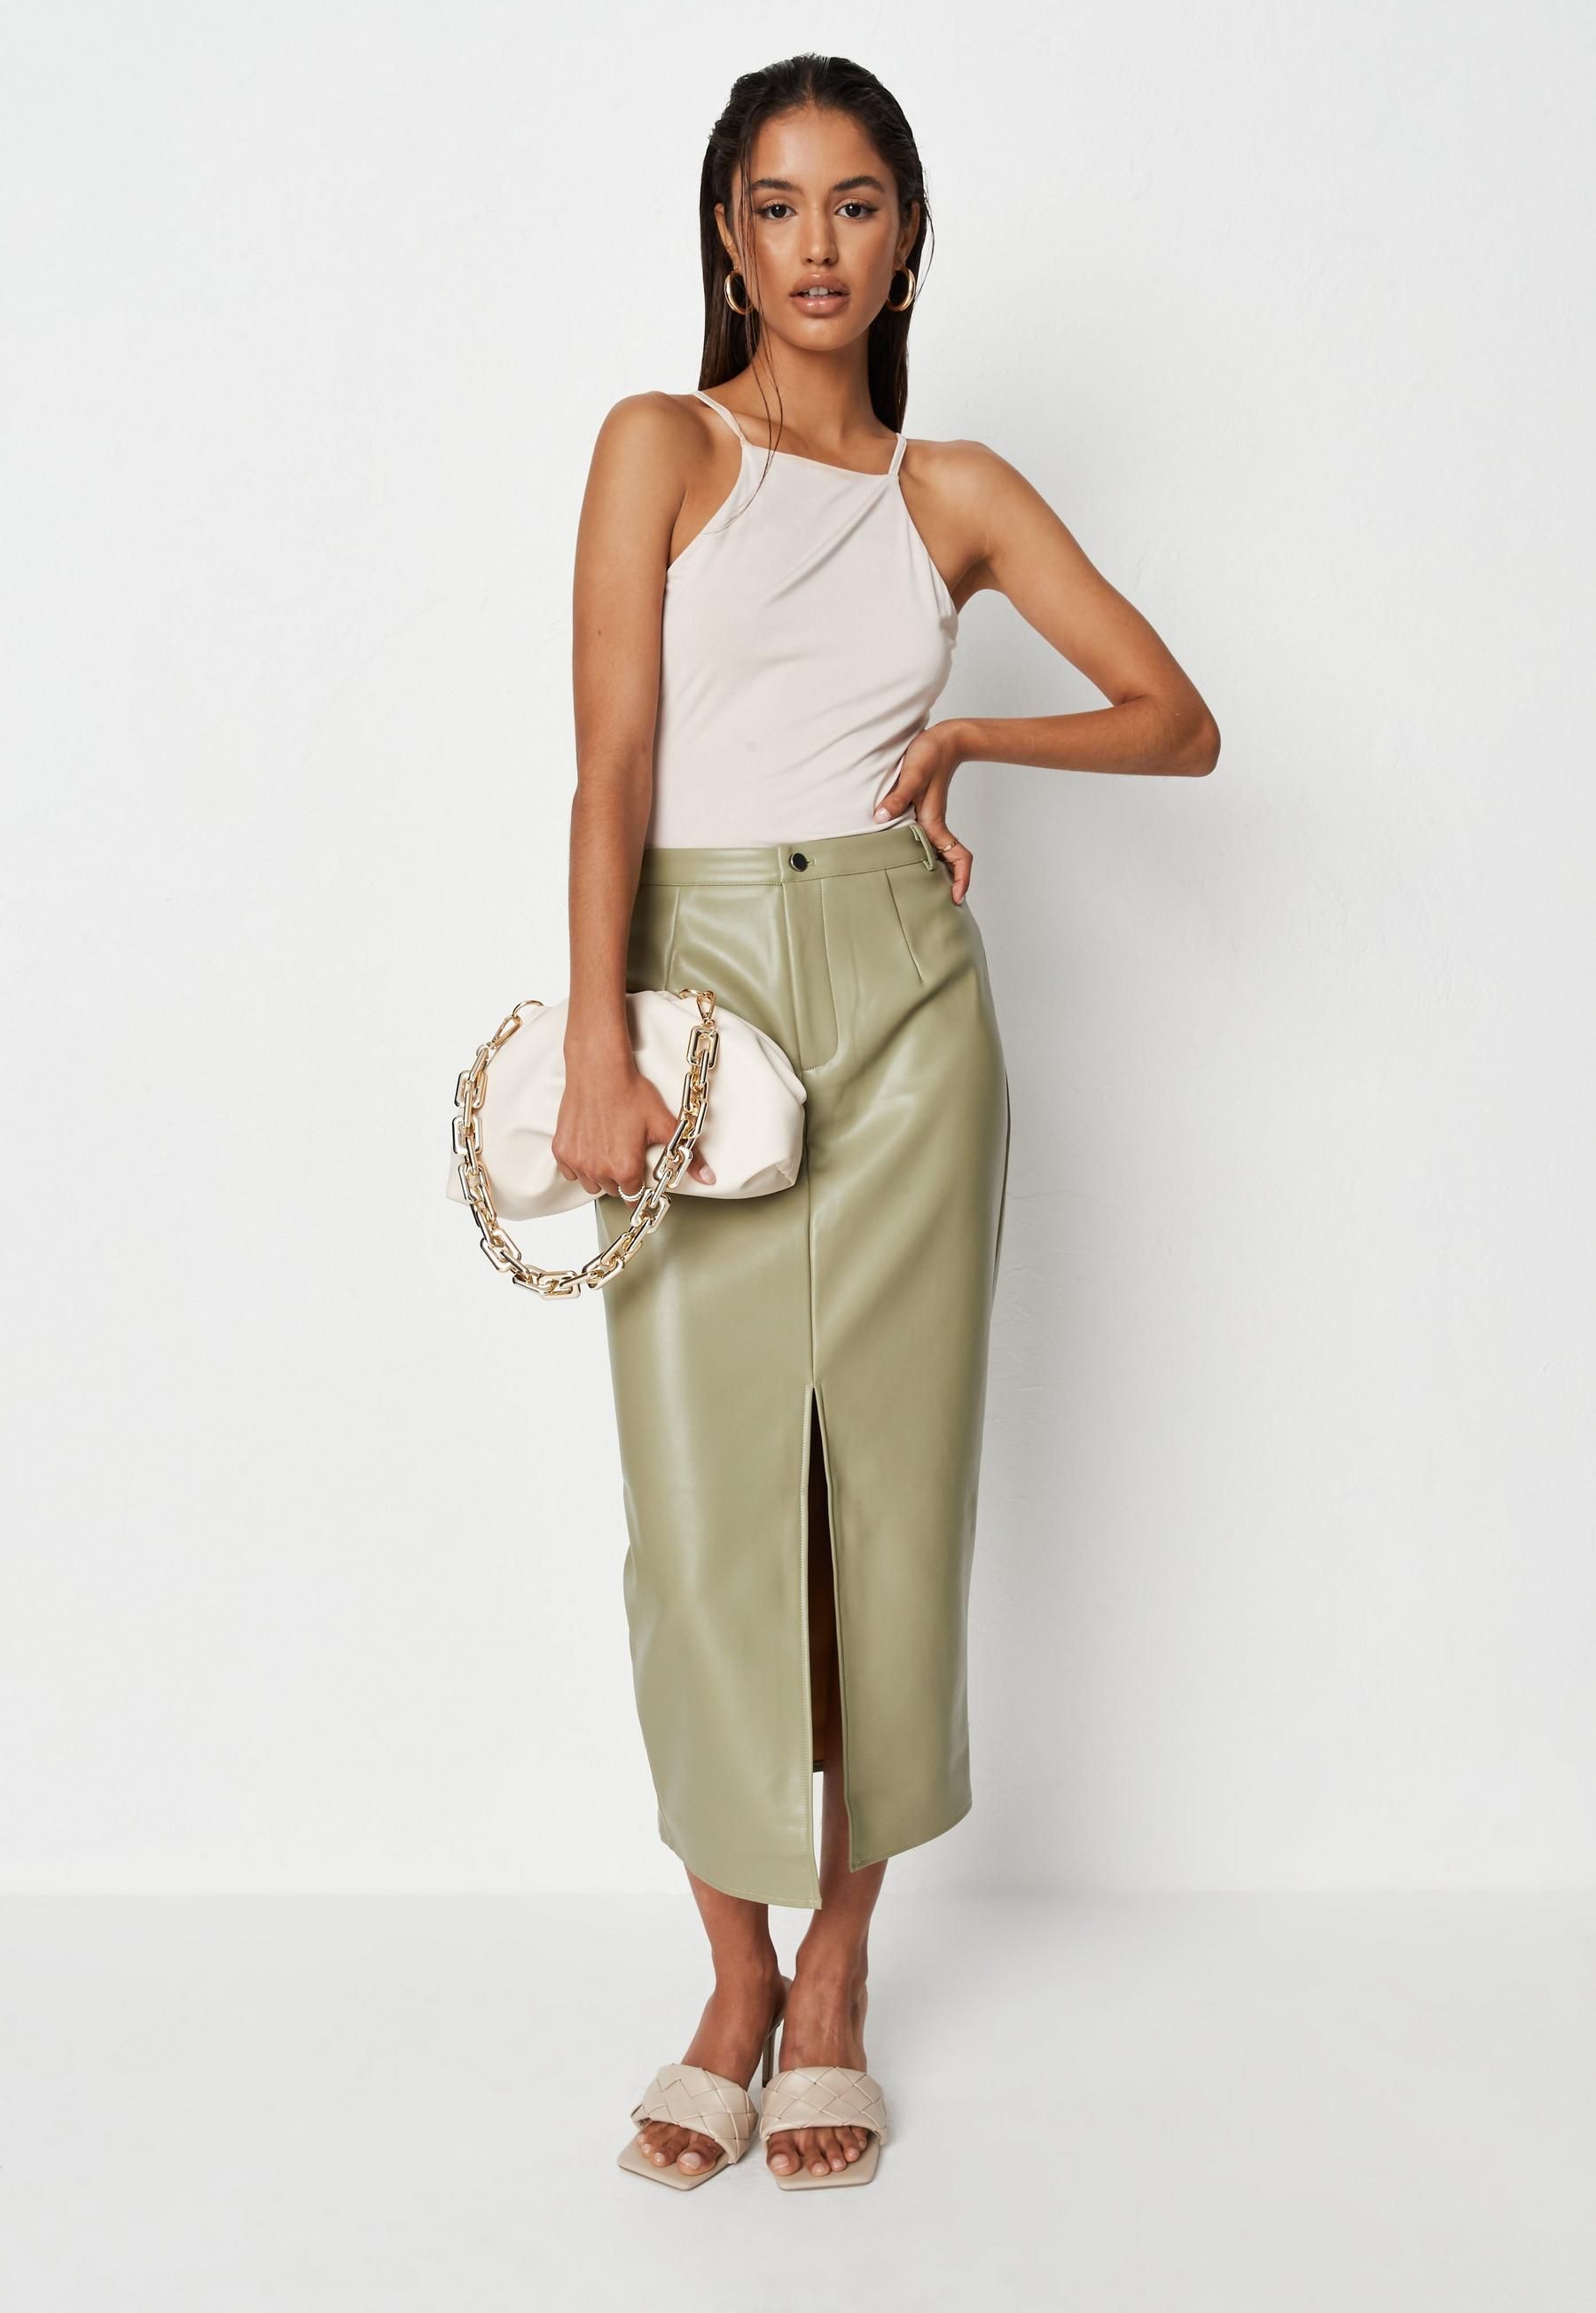 Missguided - Khaki Faux Leather Split Front Skirt | Missguided (US & CA)